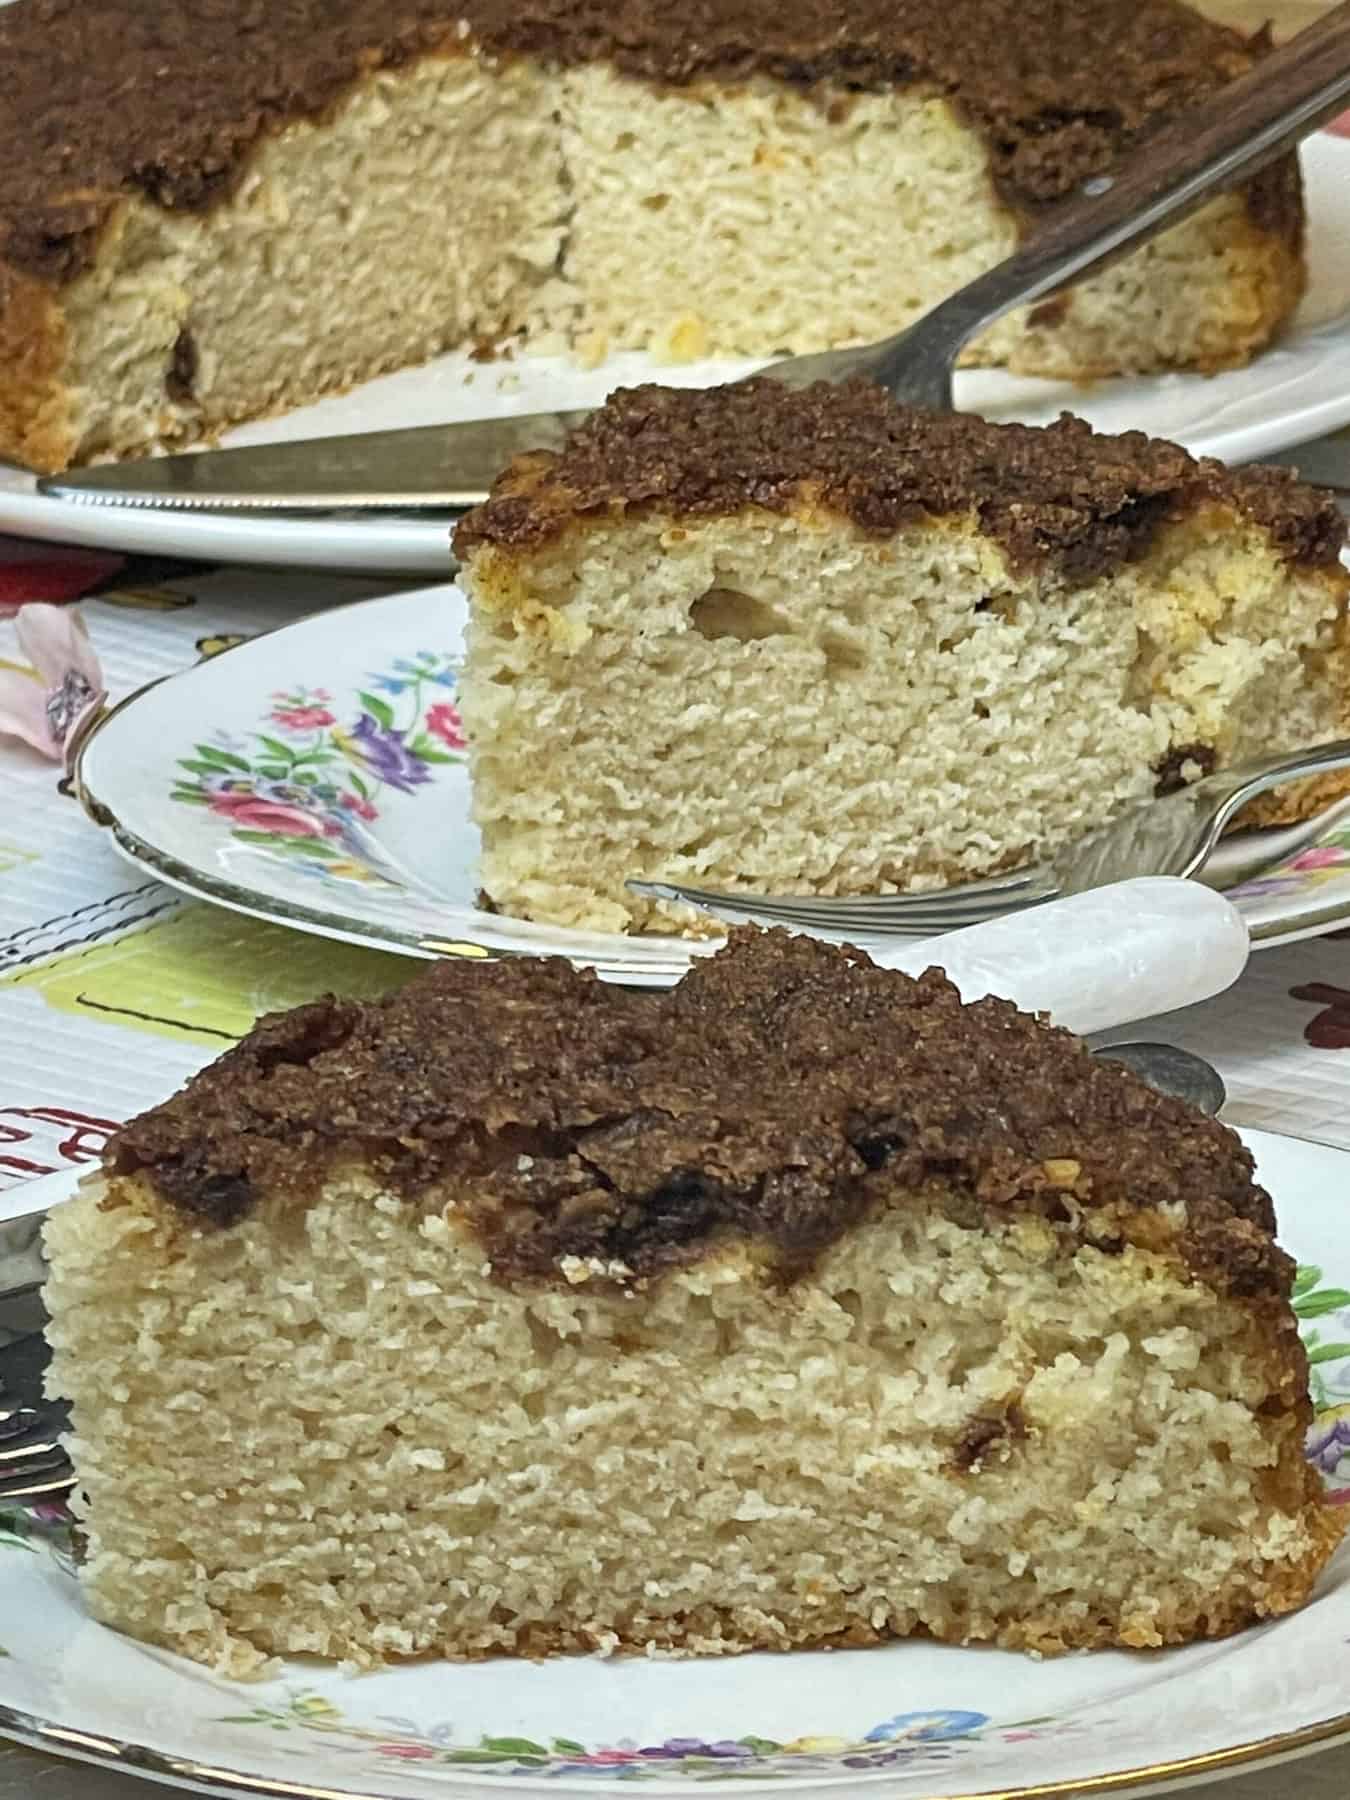 two slices of cinnamon streusel topped cake on small flower patterned plates, whole cake in background with cake slice.